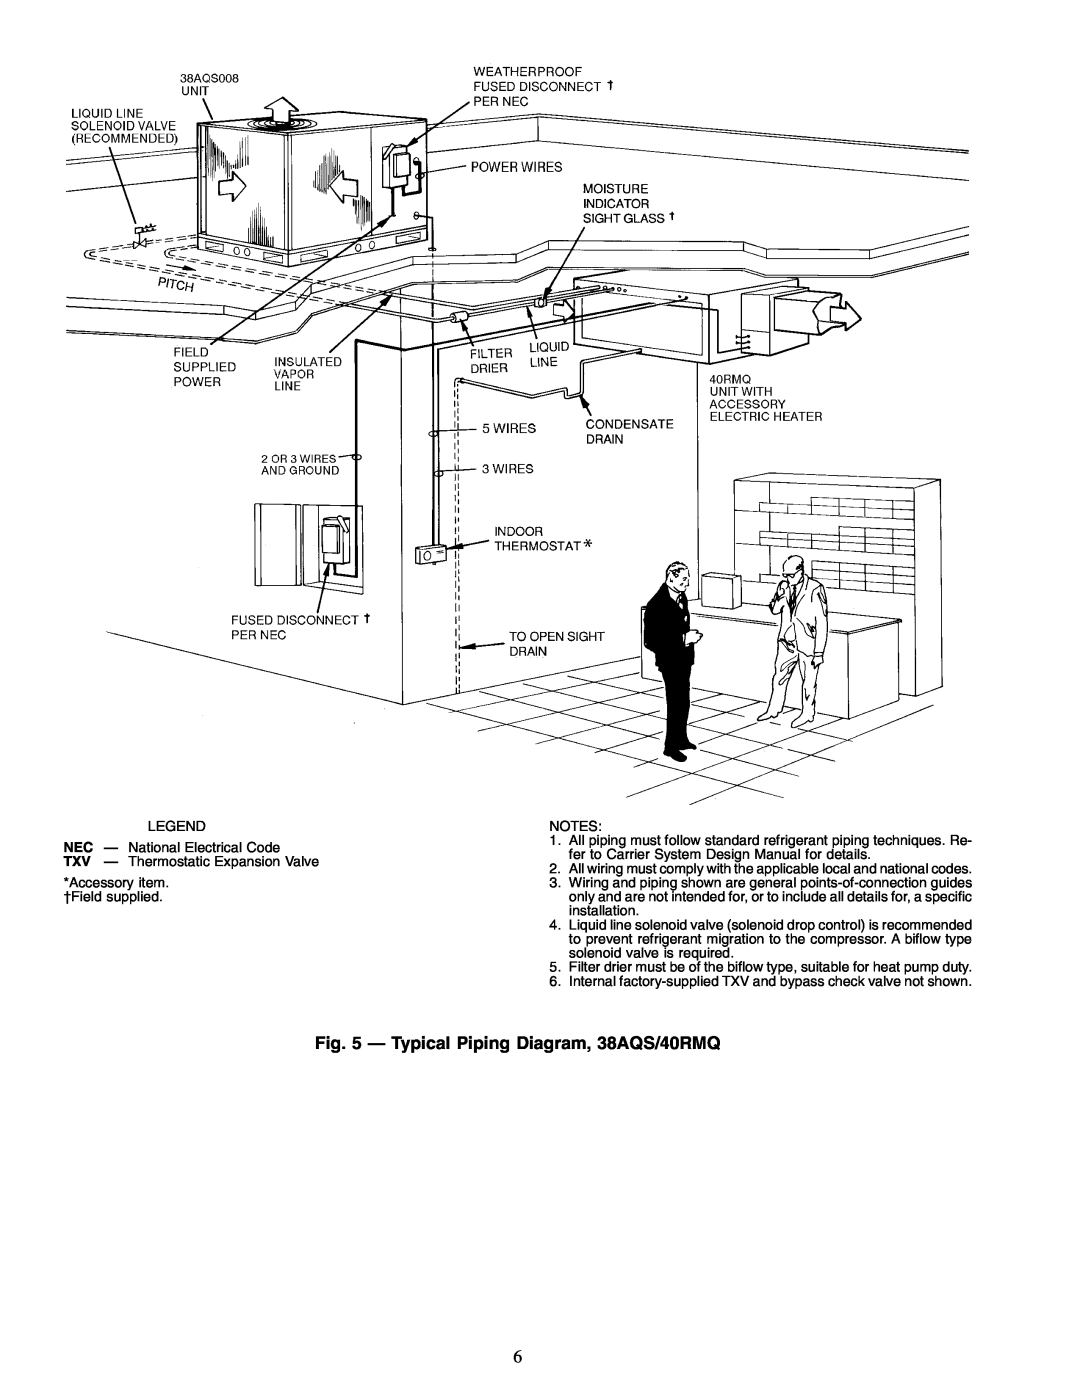 Carrier 38AQS008 specifications Typical Piping Diagram, 38AQS/40RMQ 